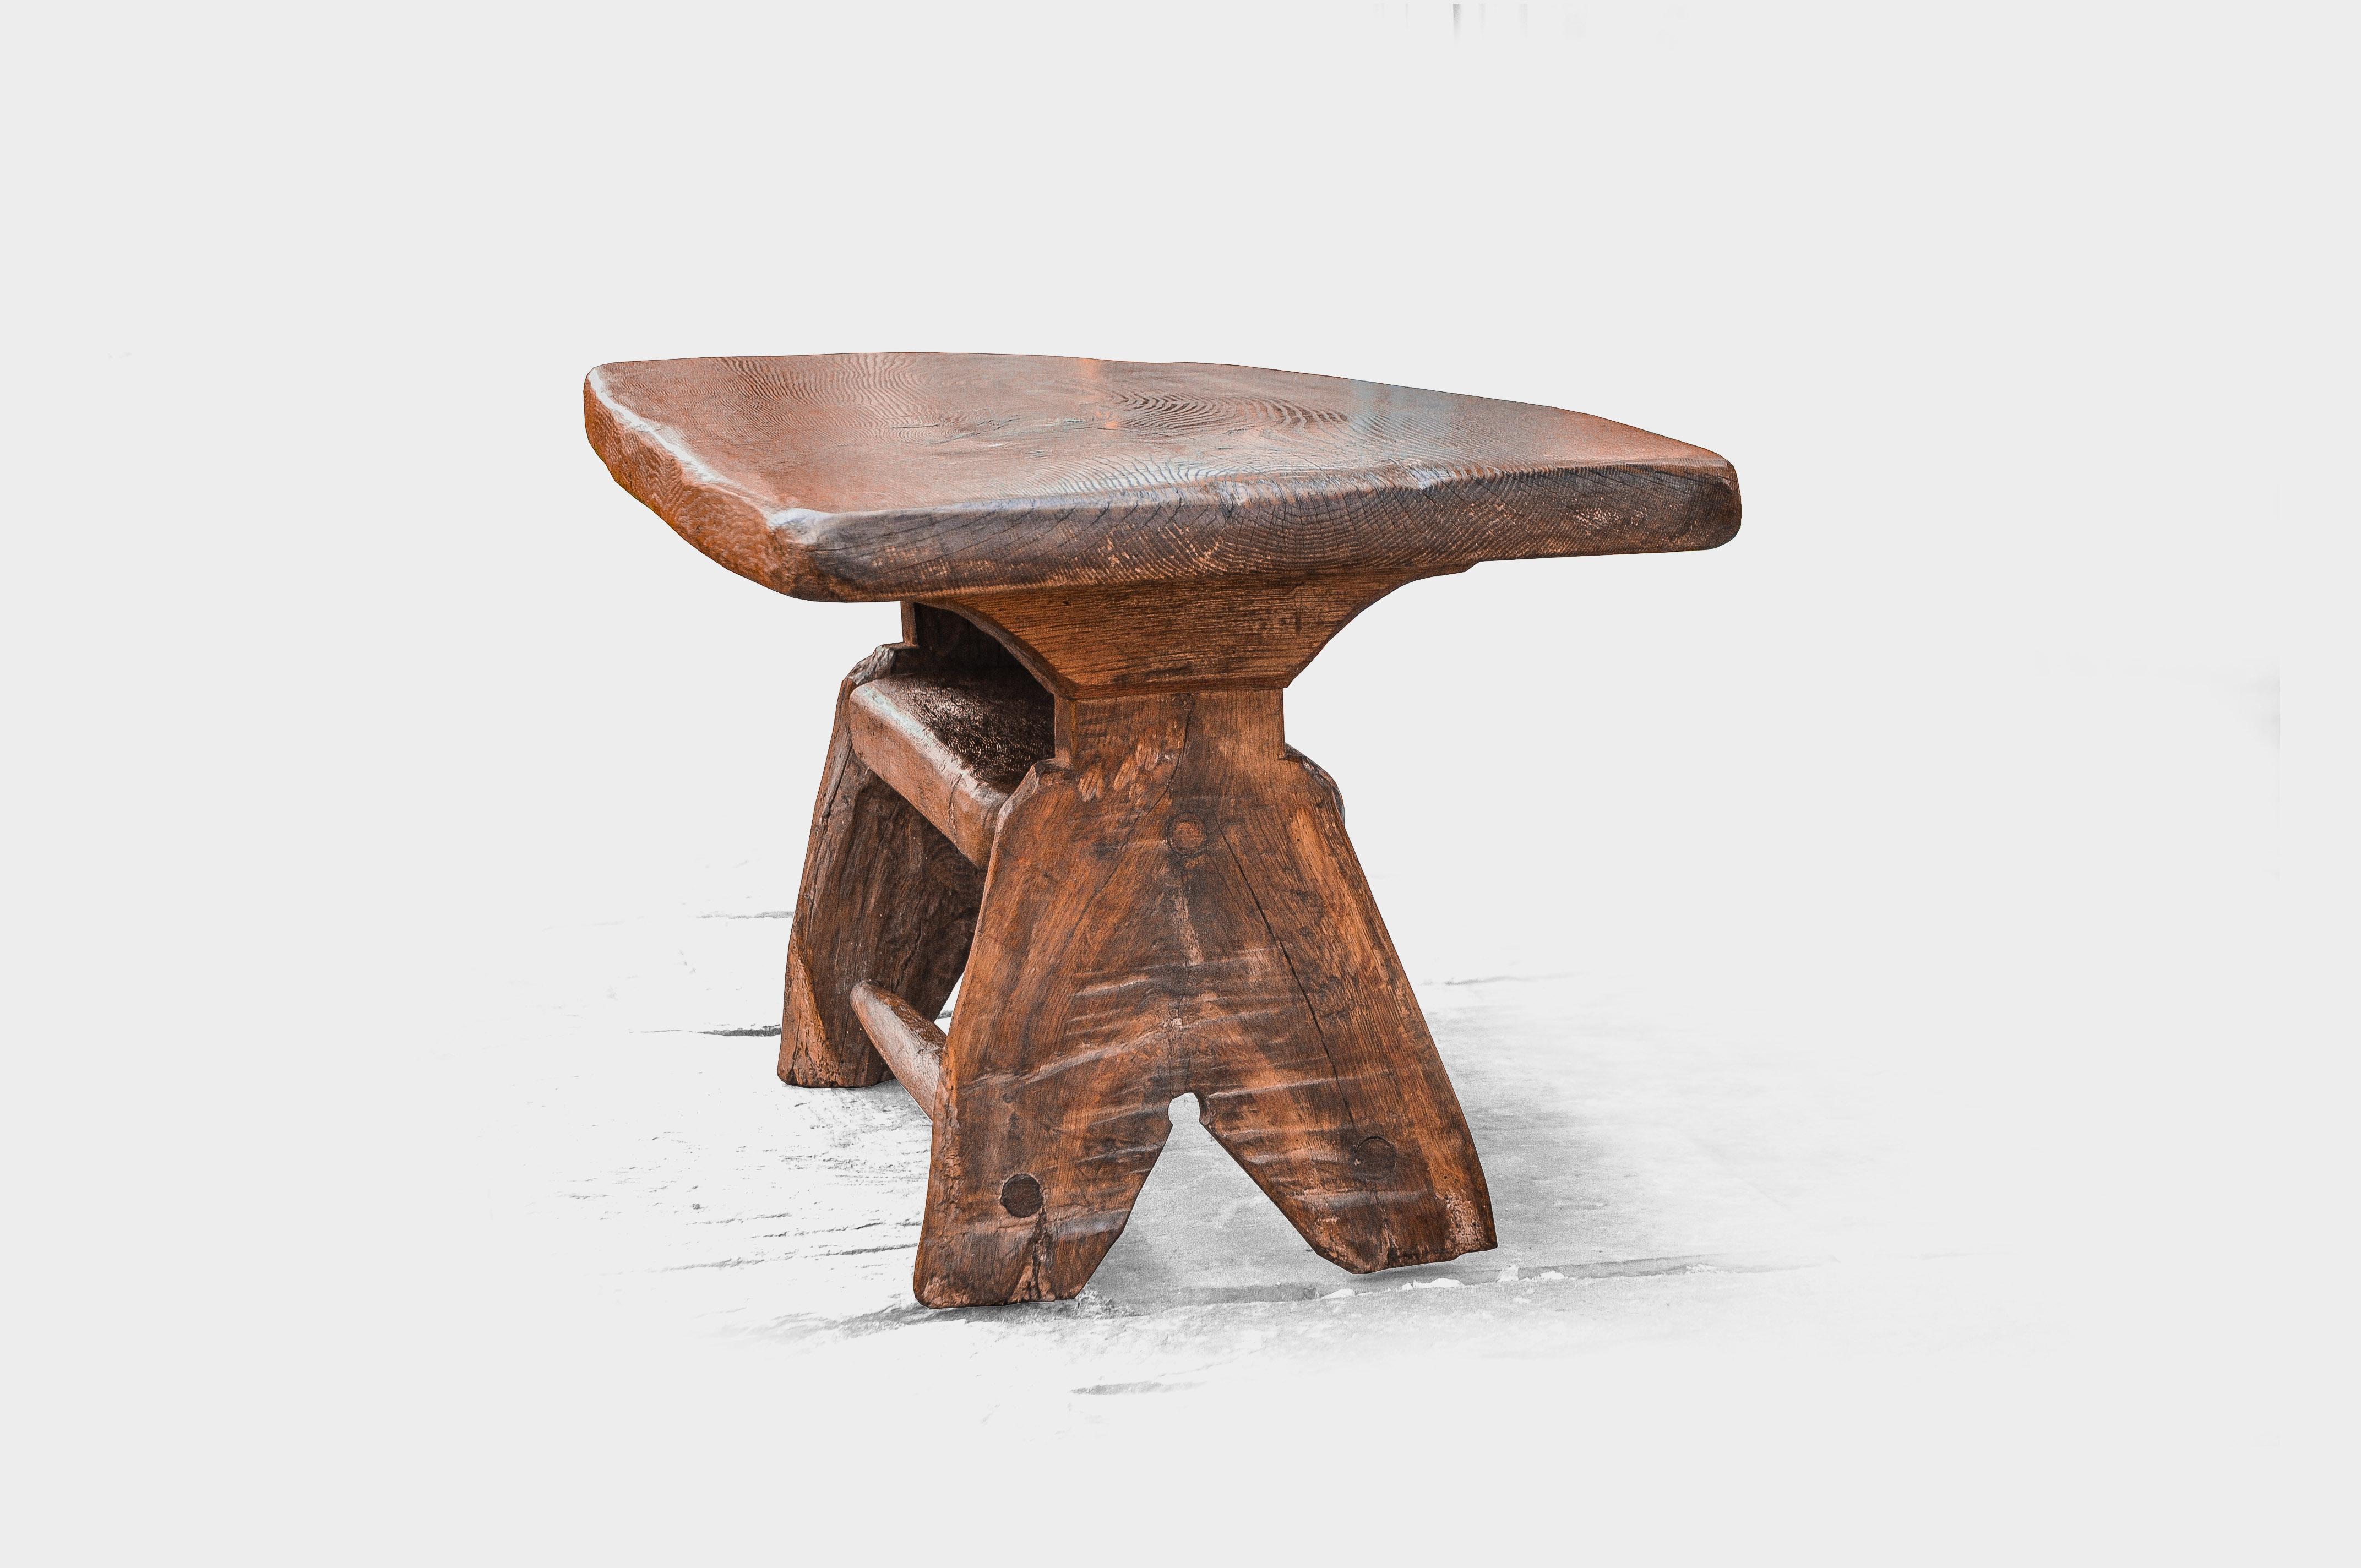 Brutalistic Handmade Coffee Table from Solid Oak, Swiss Alpine Furniture In Fair Condition For Sale In Zürich, CH